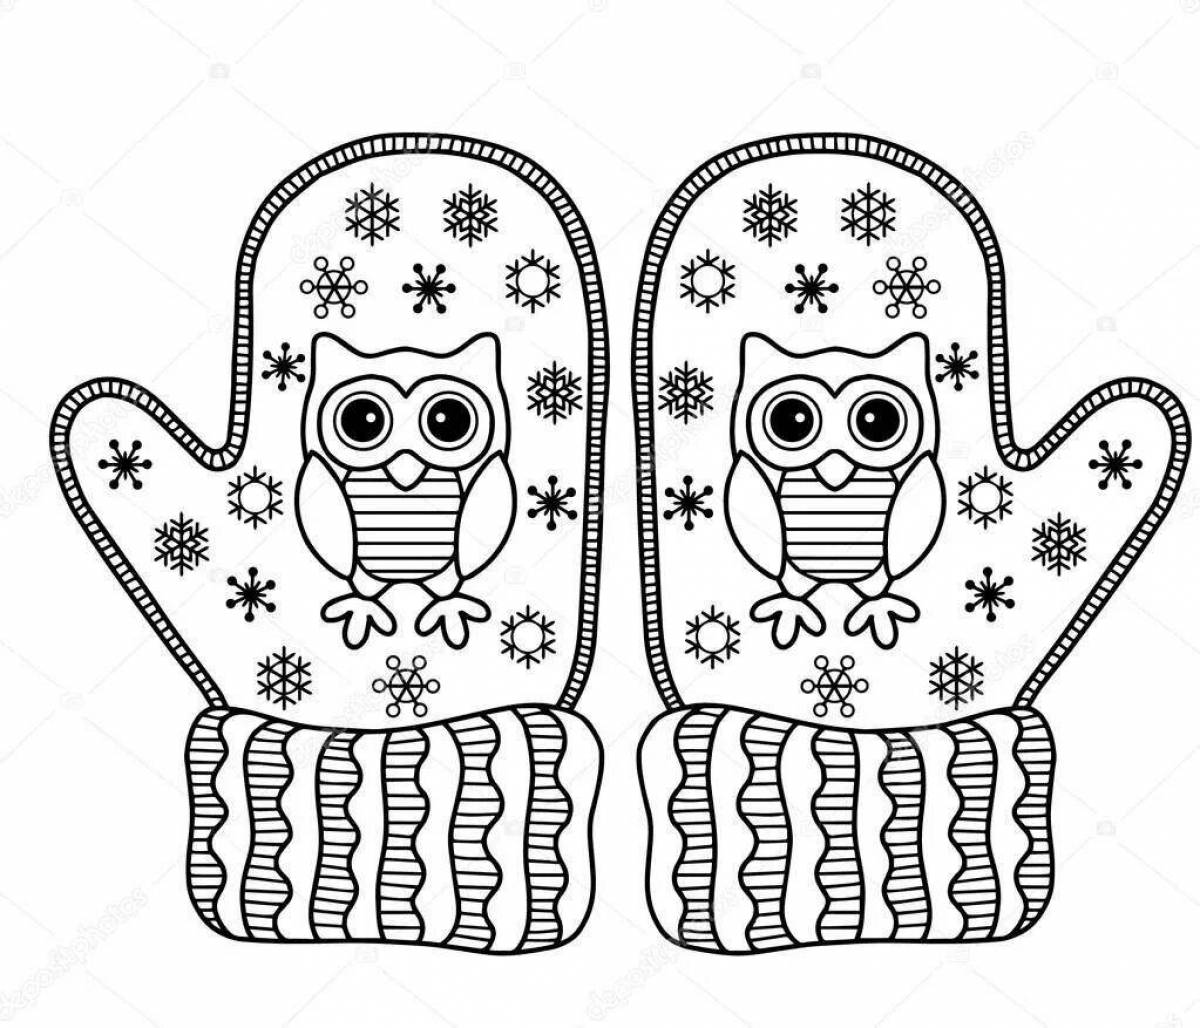 Sweet mittens coloring for children 4-5 years old